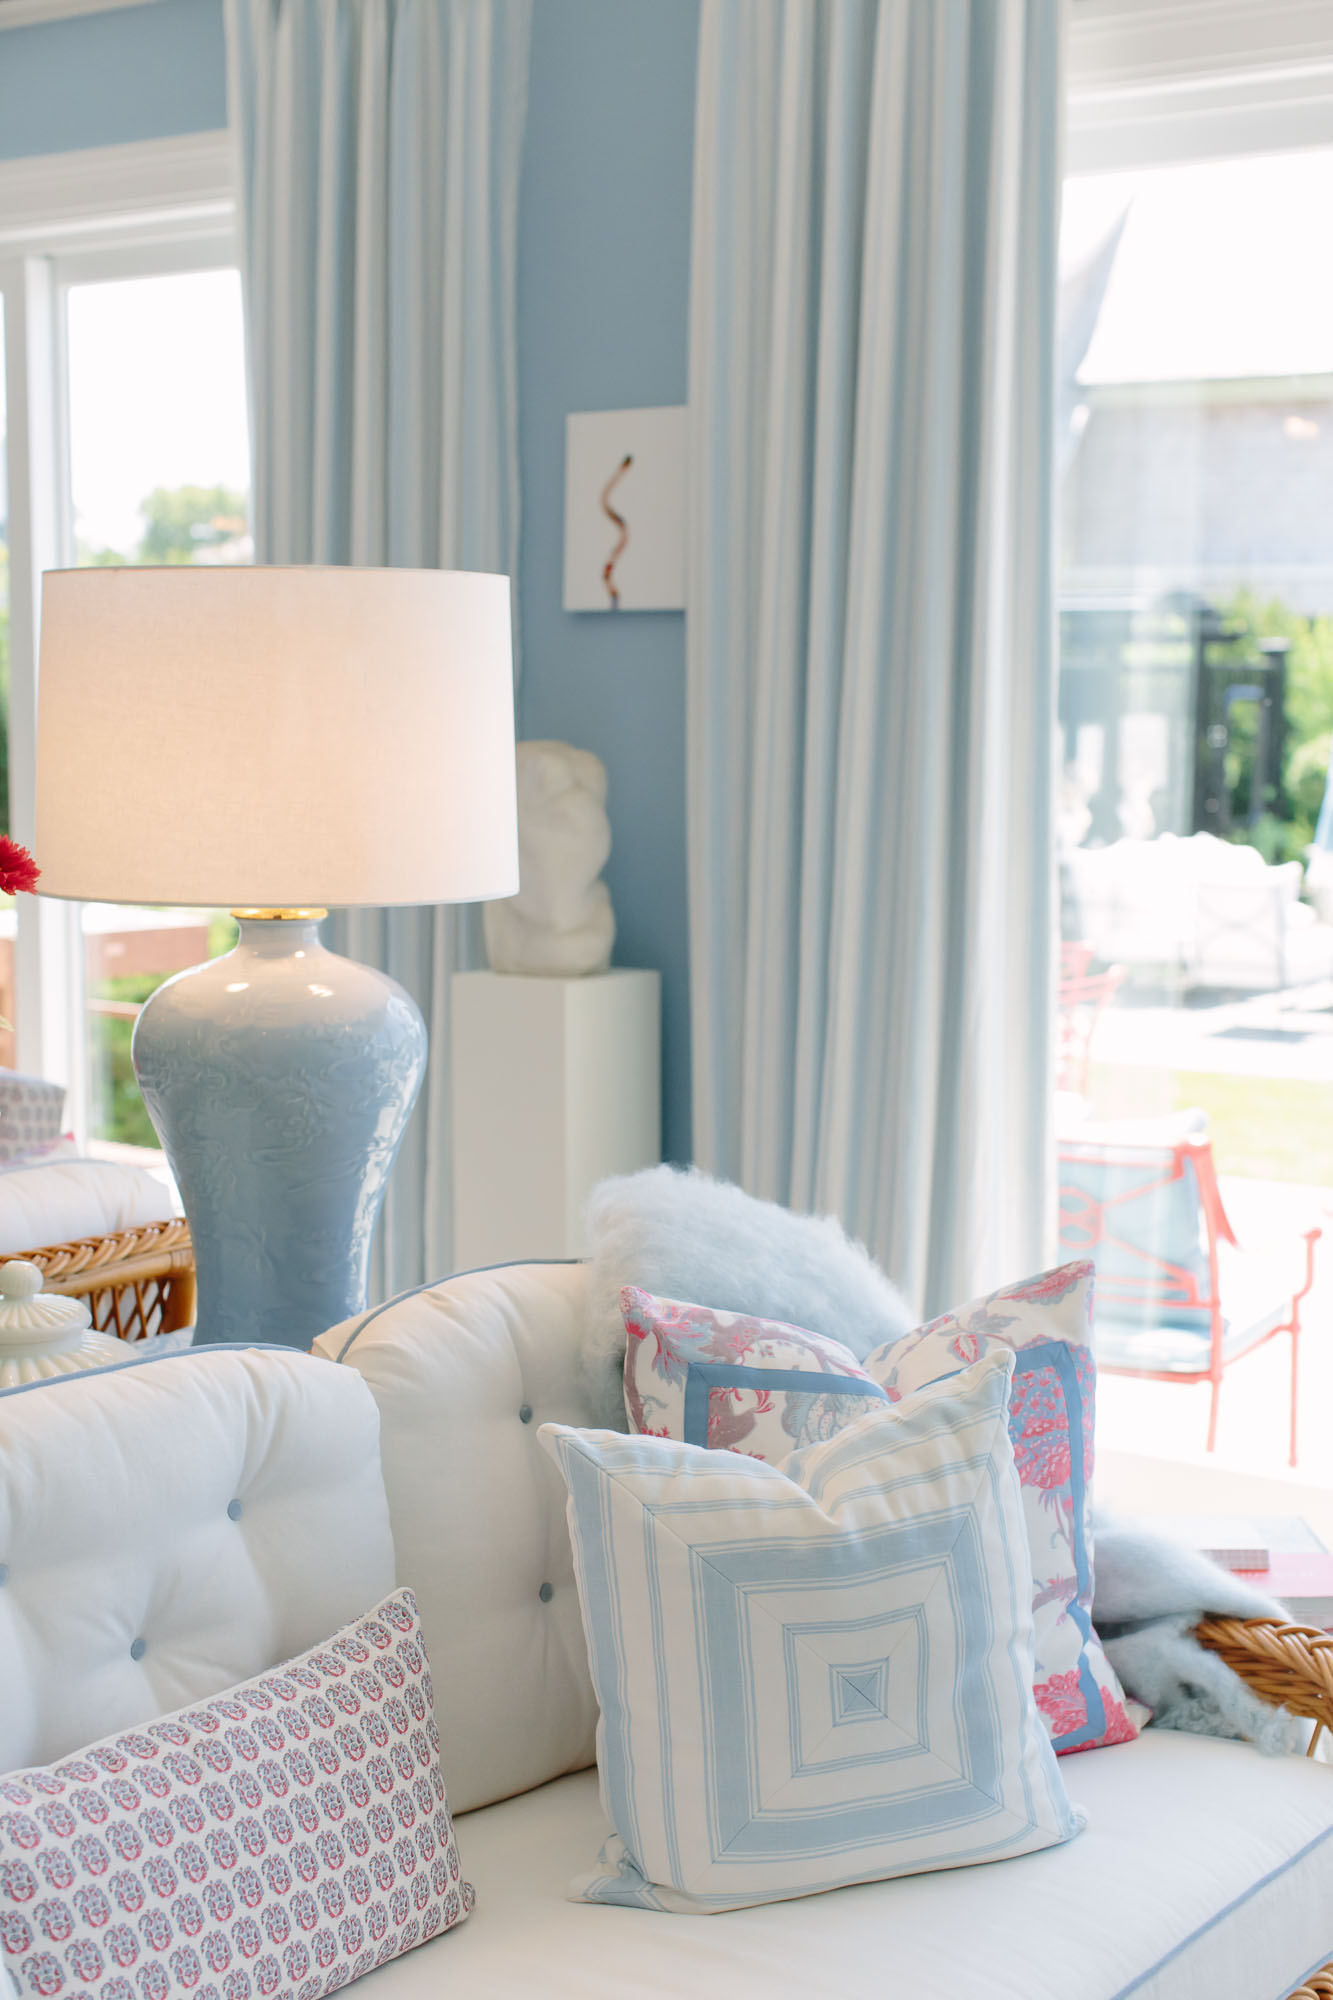 2019 Hampton Designer Showhouse featured by top US style blog, York Avenue: image of Alessandra Branca living room at the 2019 Hampton Designer Showhouse